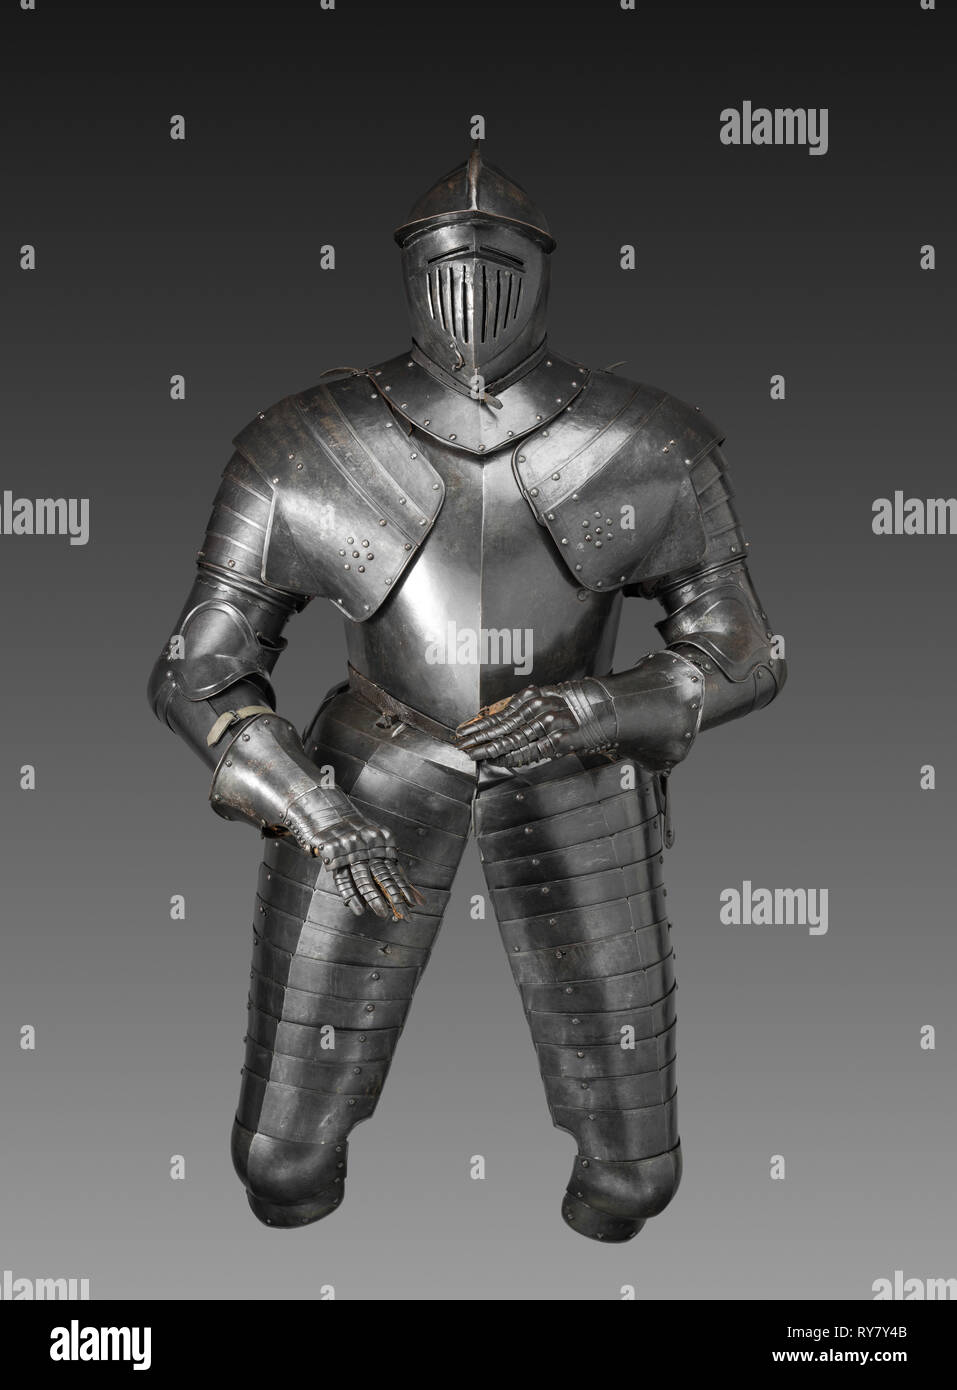 Cuirassier's Armor, c. 1600-1620. Austria, Graz(?), early 17th century. Steel (originally blued, now black); leather straps; overall: 171.4 cm (67 1/2 in Stock Photo